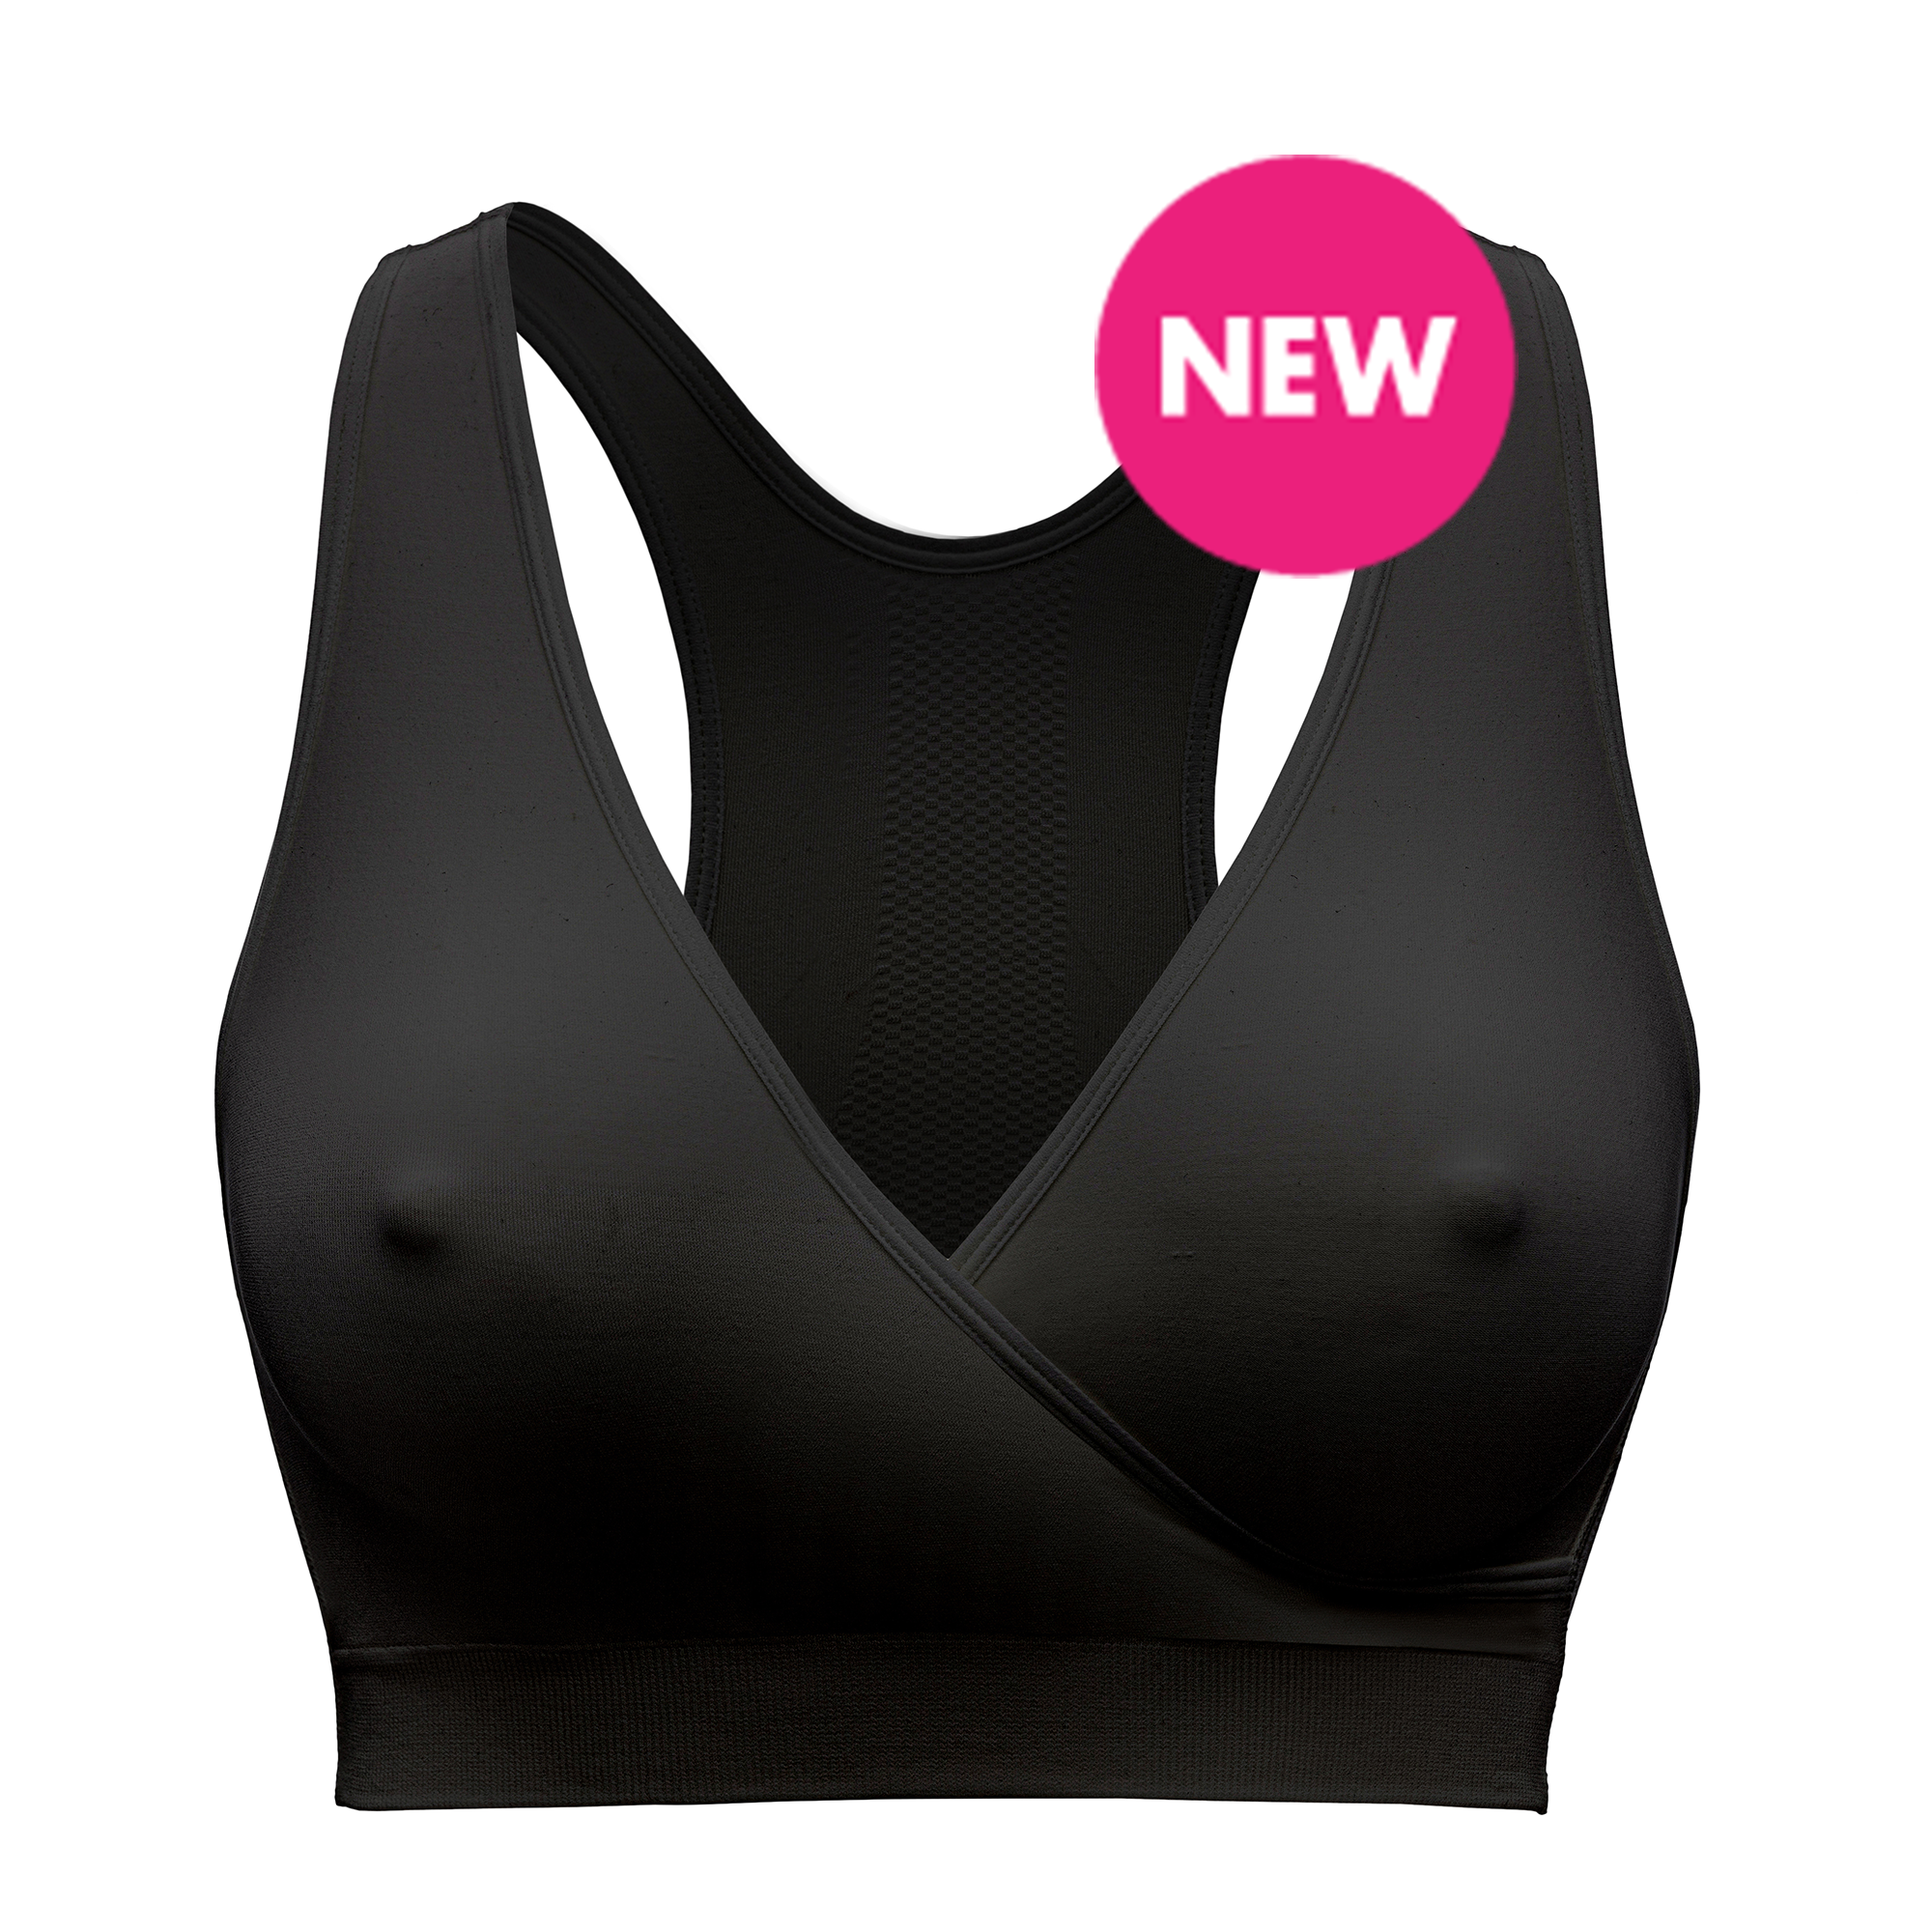 This Cooling Bra Will Keep Your Chest Dry in the Heat